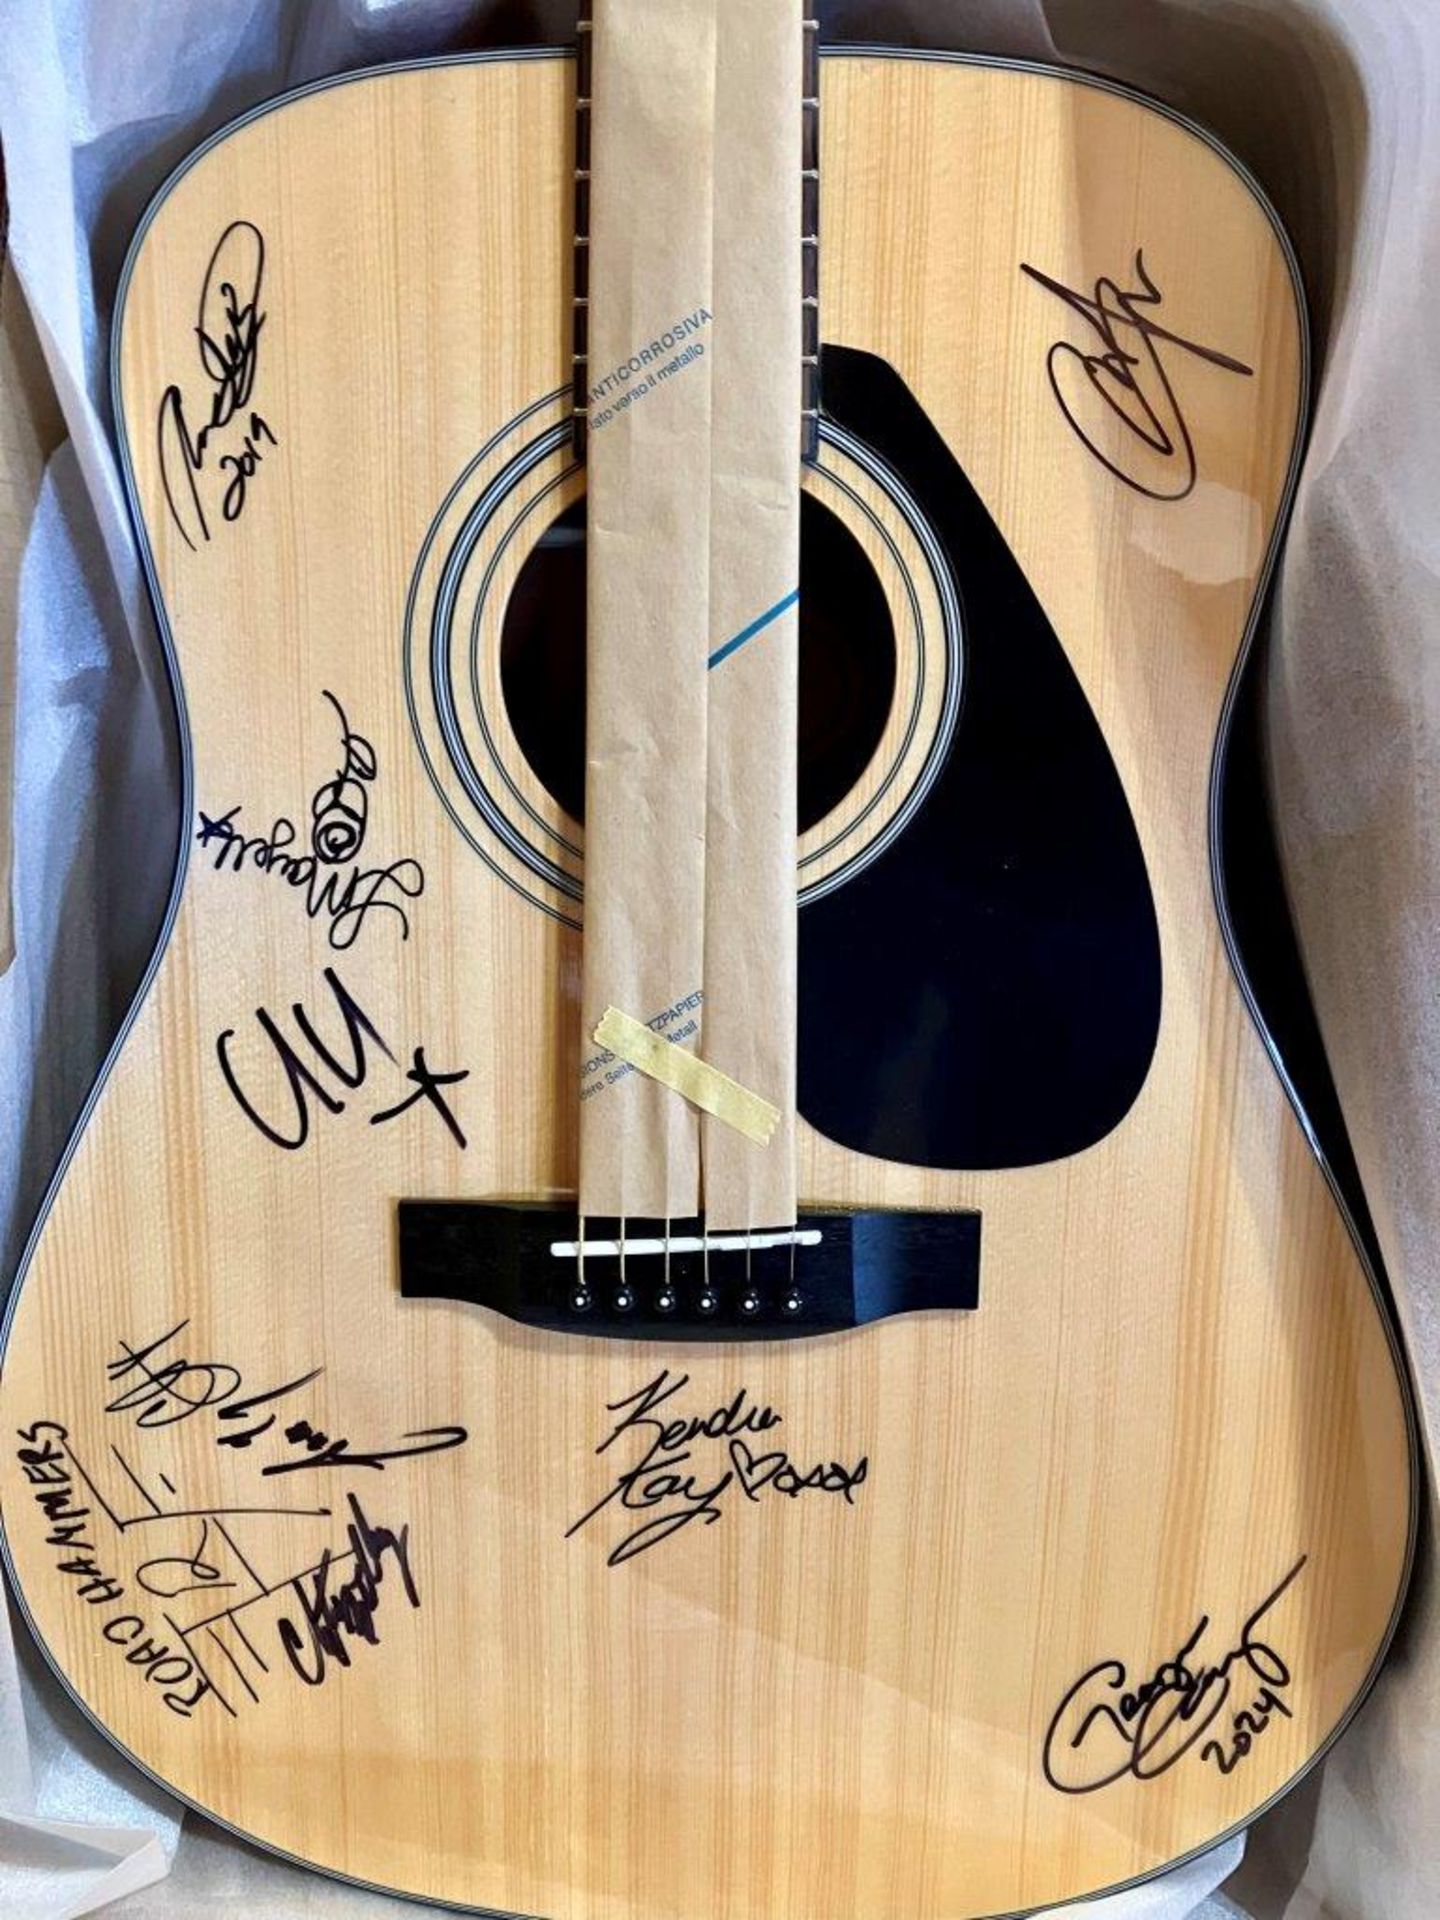 YAHAMA ACOUSTIC GUITAR SIGNED BY COUNTRY MUSICIANS - Image 2 of 5